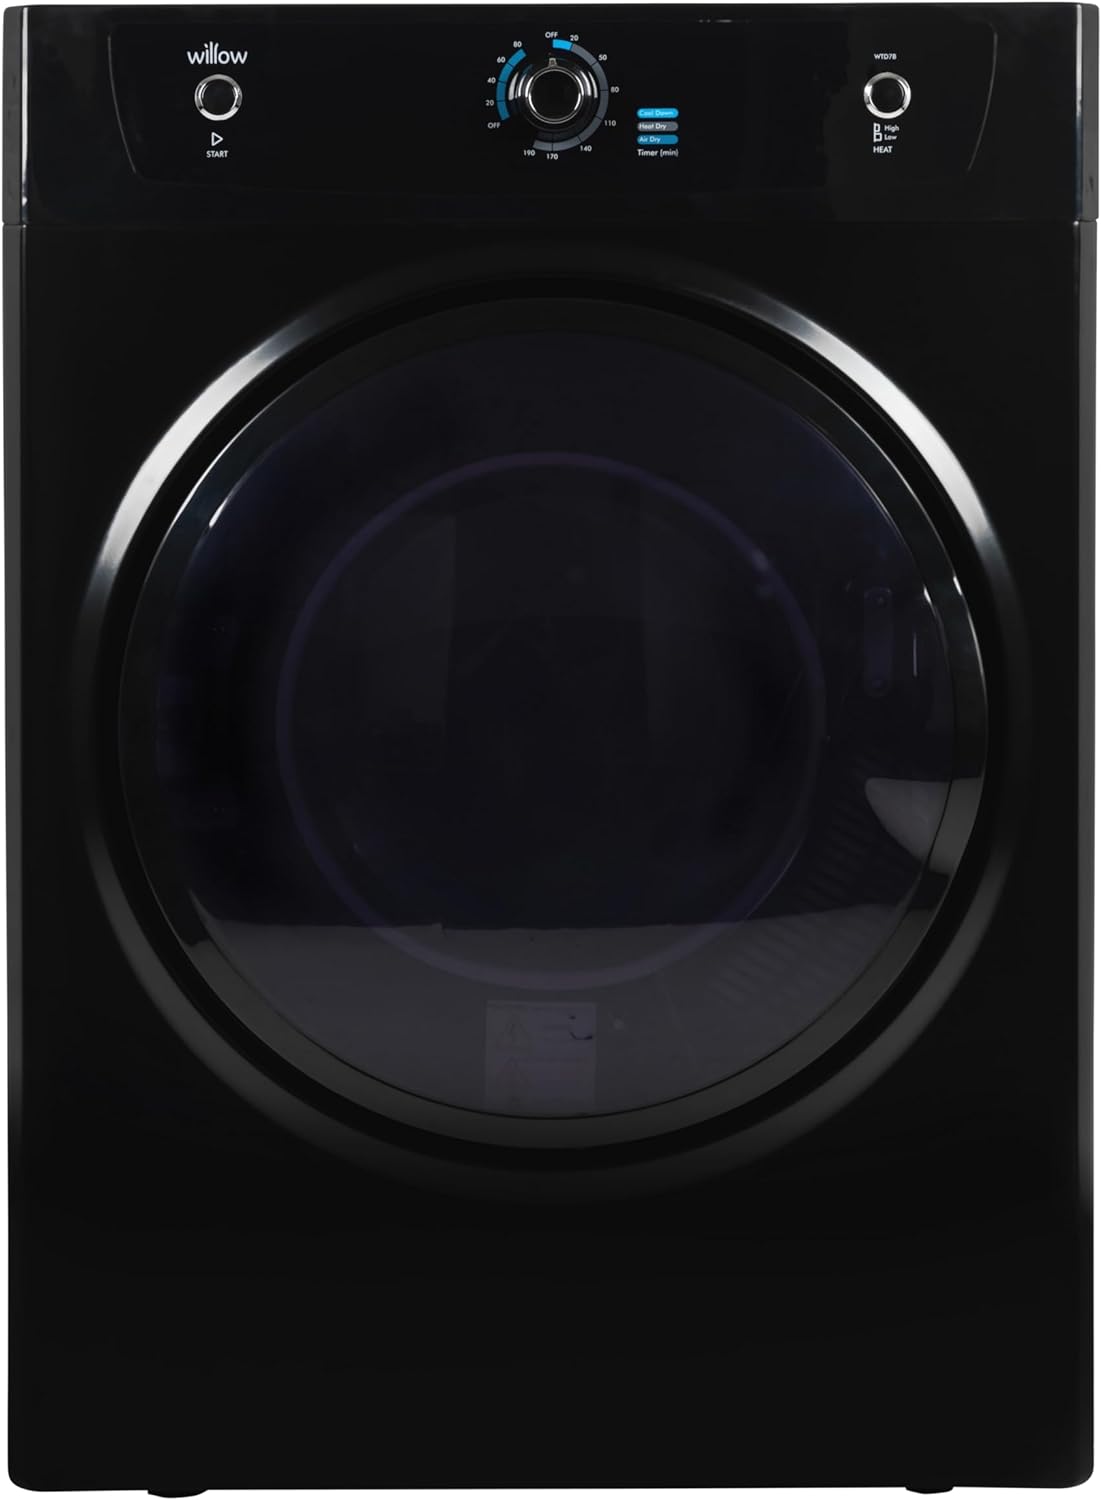 Willow WTD7B 7kg Vented Dryer, Front Loading with Child Lock, 3 Temperatures, Mehanical Controls, Crease Guard, 2 Year Warranty - Black - Amazing Gadgets Outlet